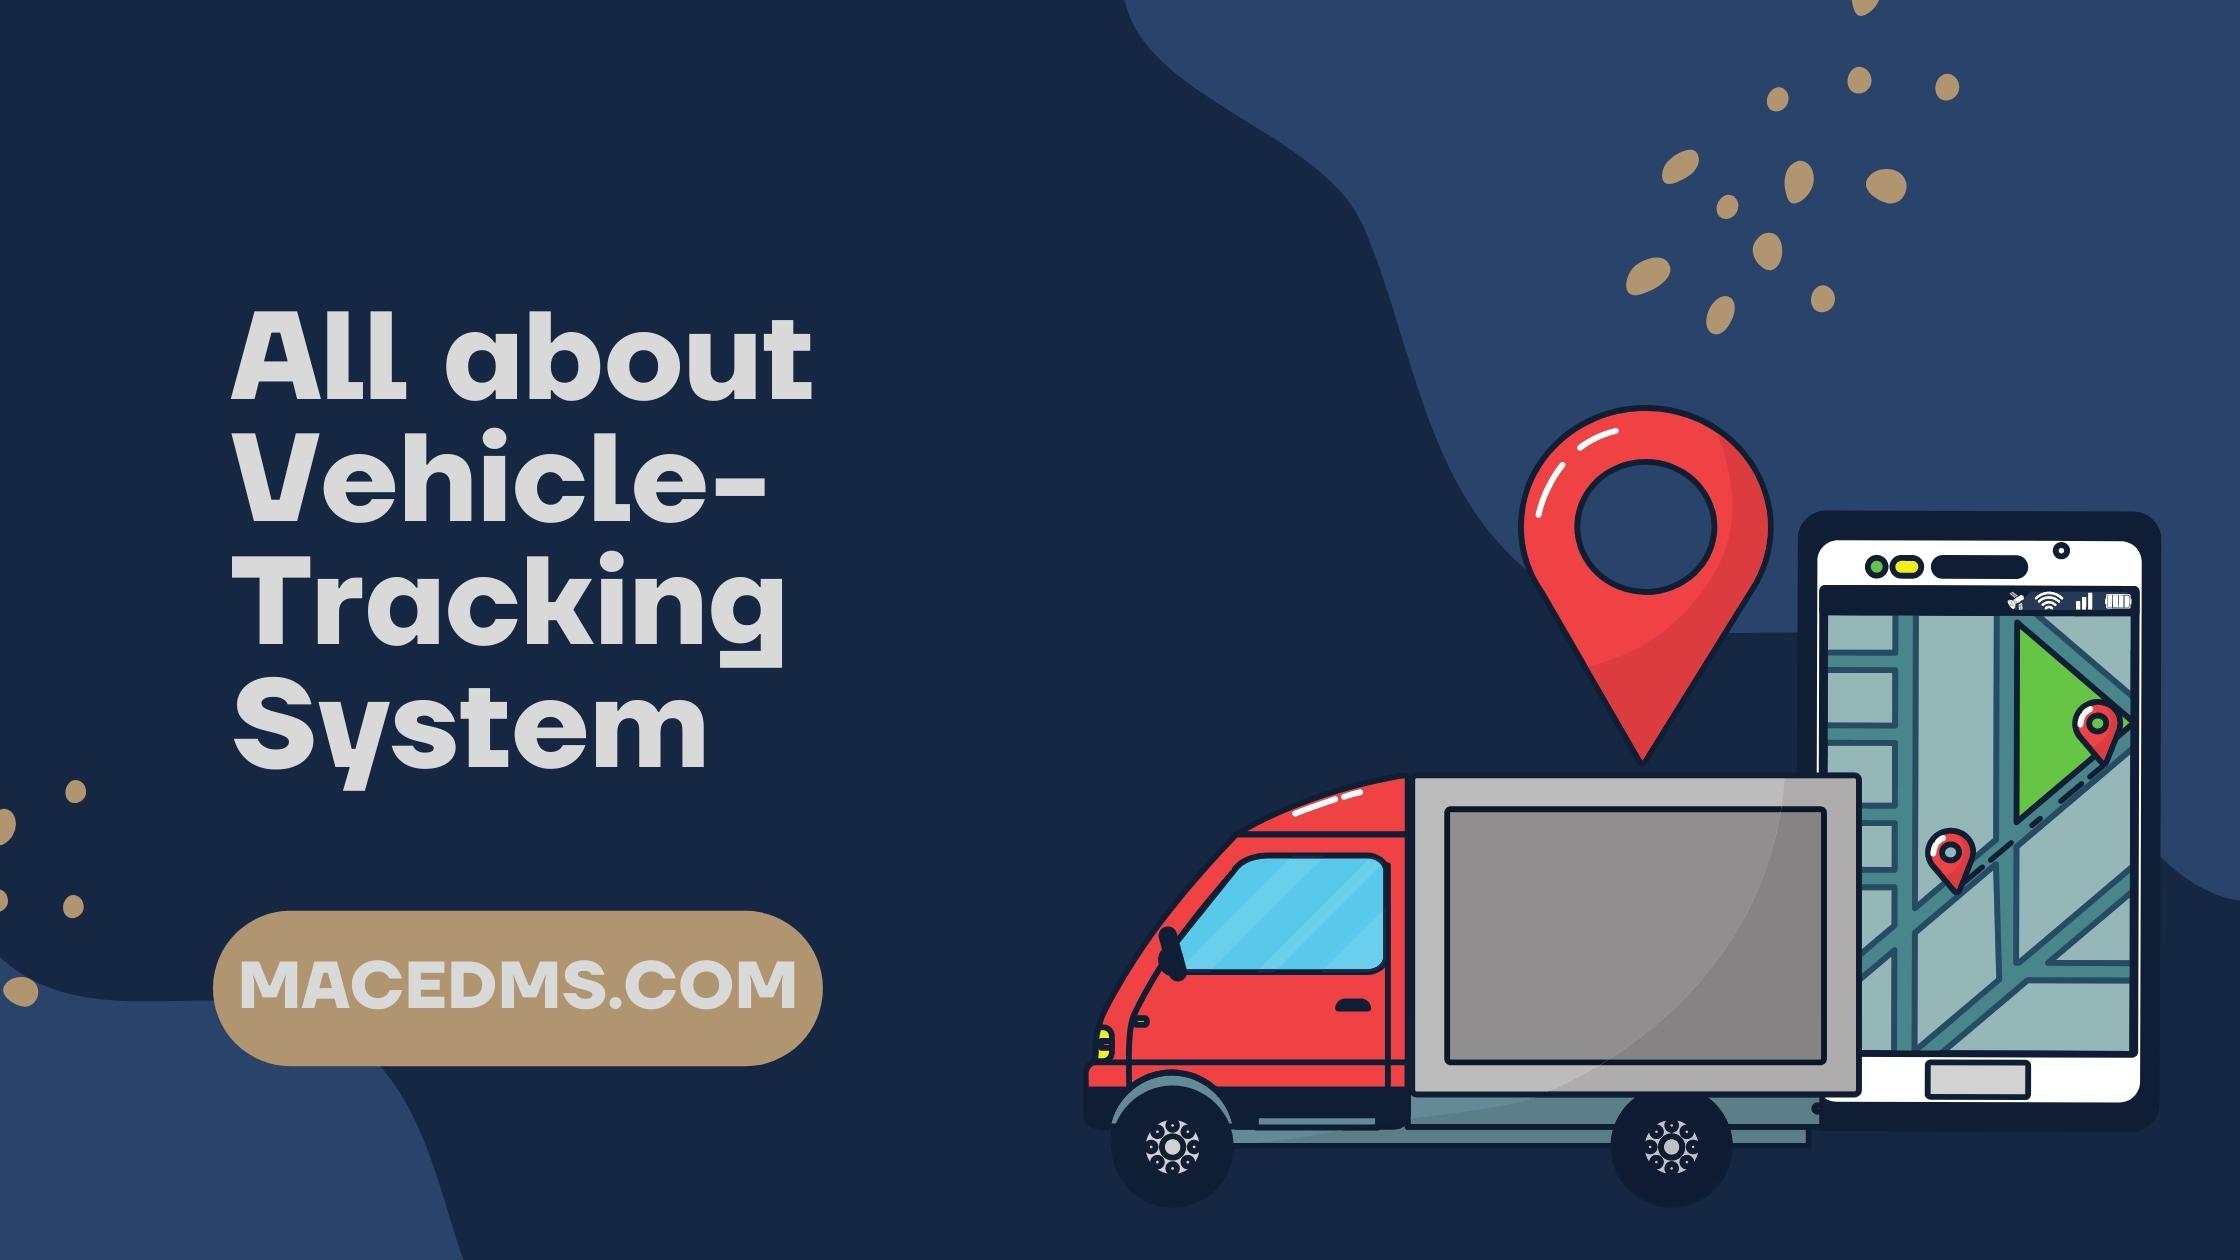 Vehicle-Tracking System